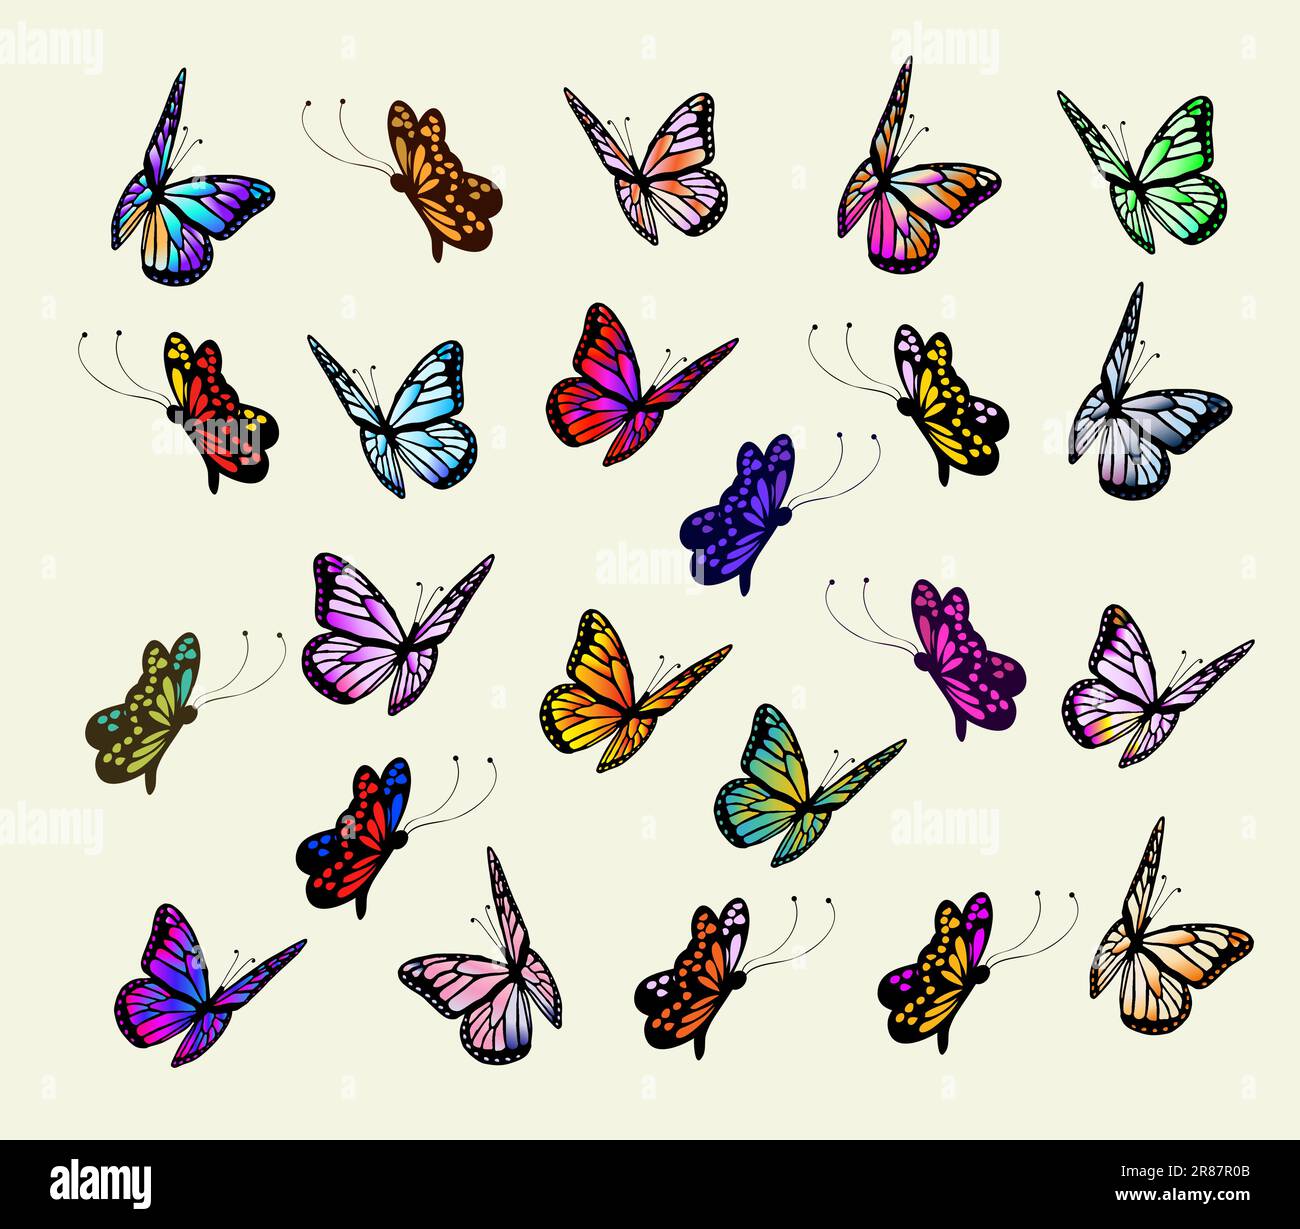 Collection Of Colorful Butterflies Vector Illustration Stock Vector